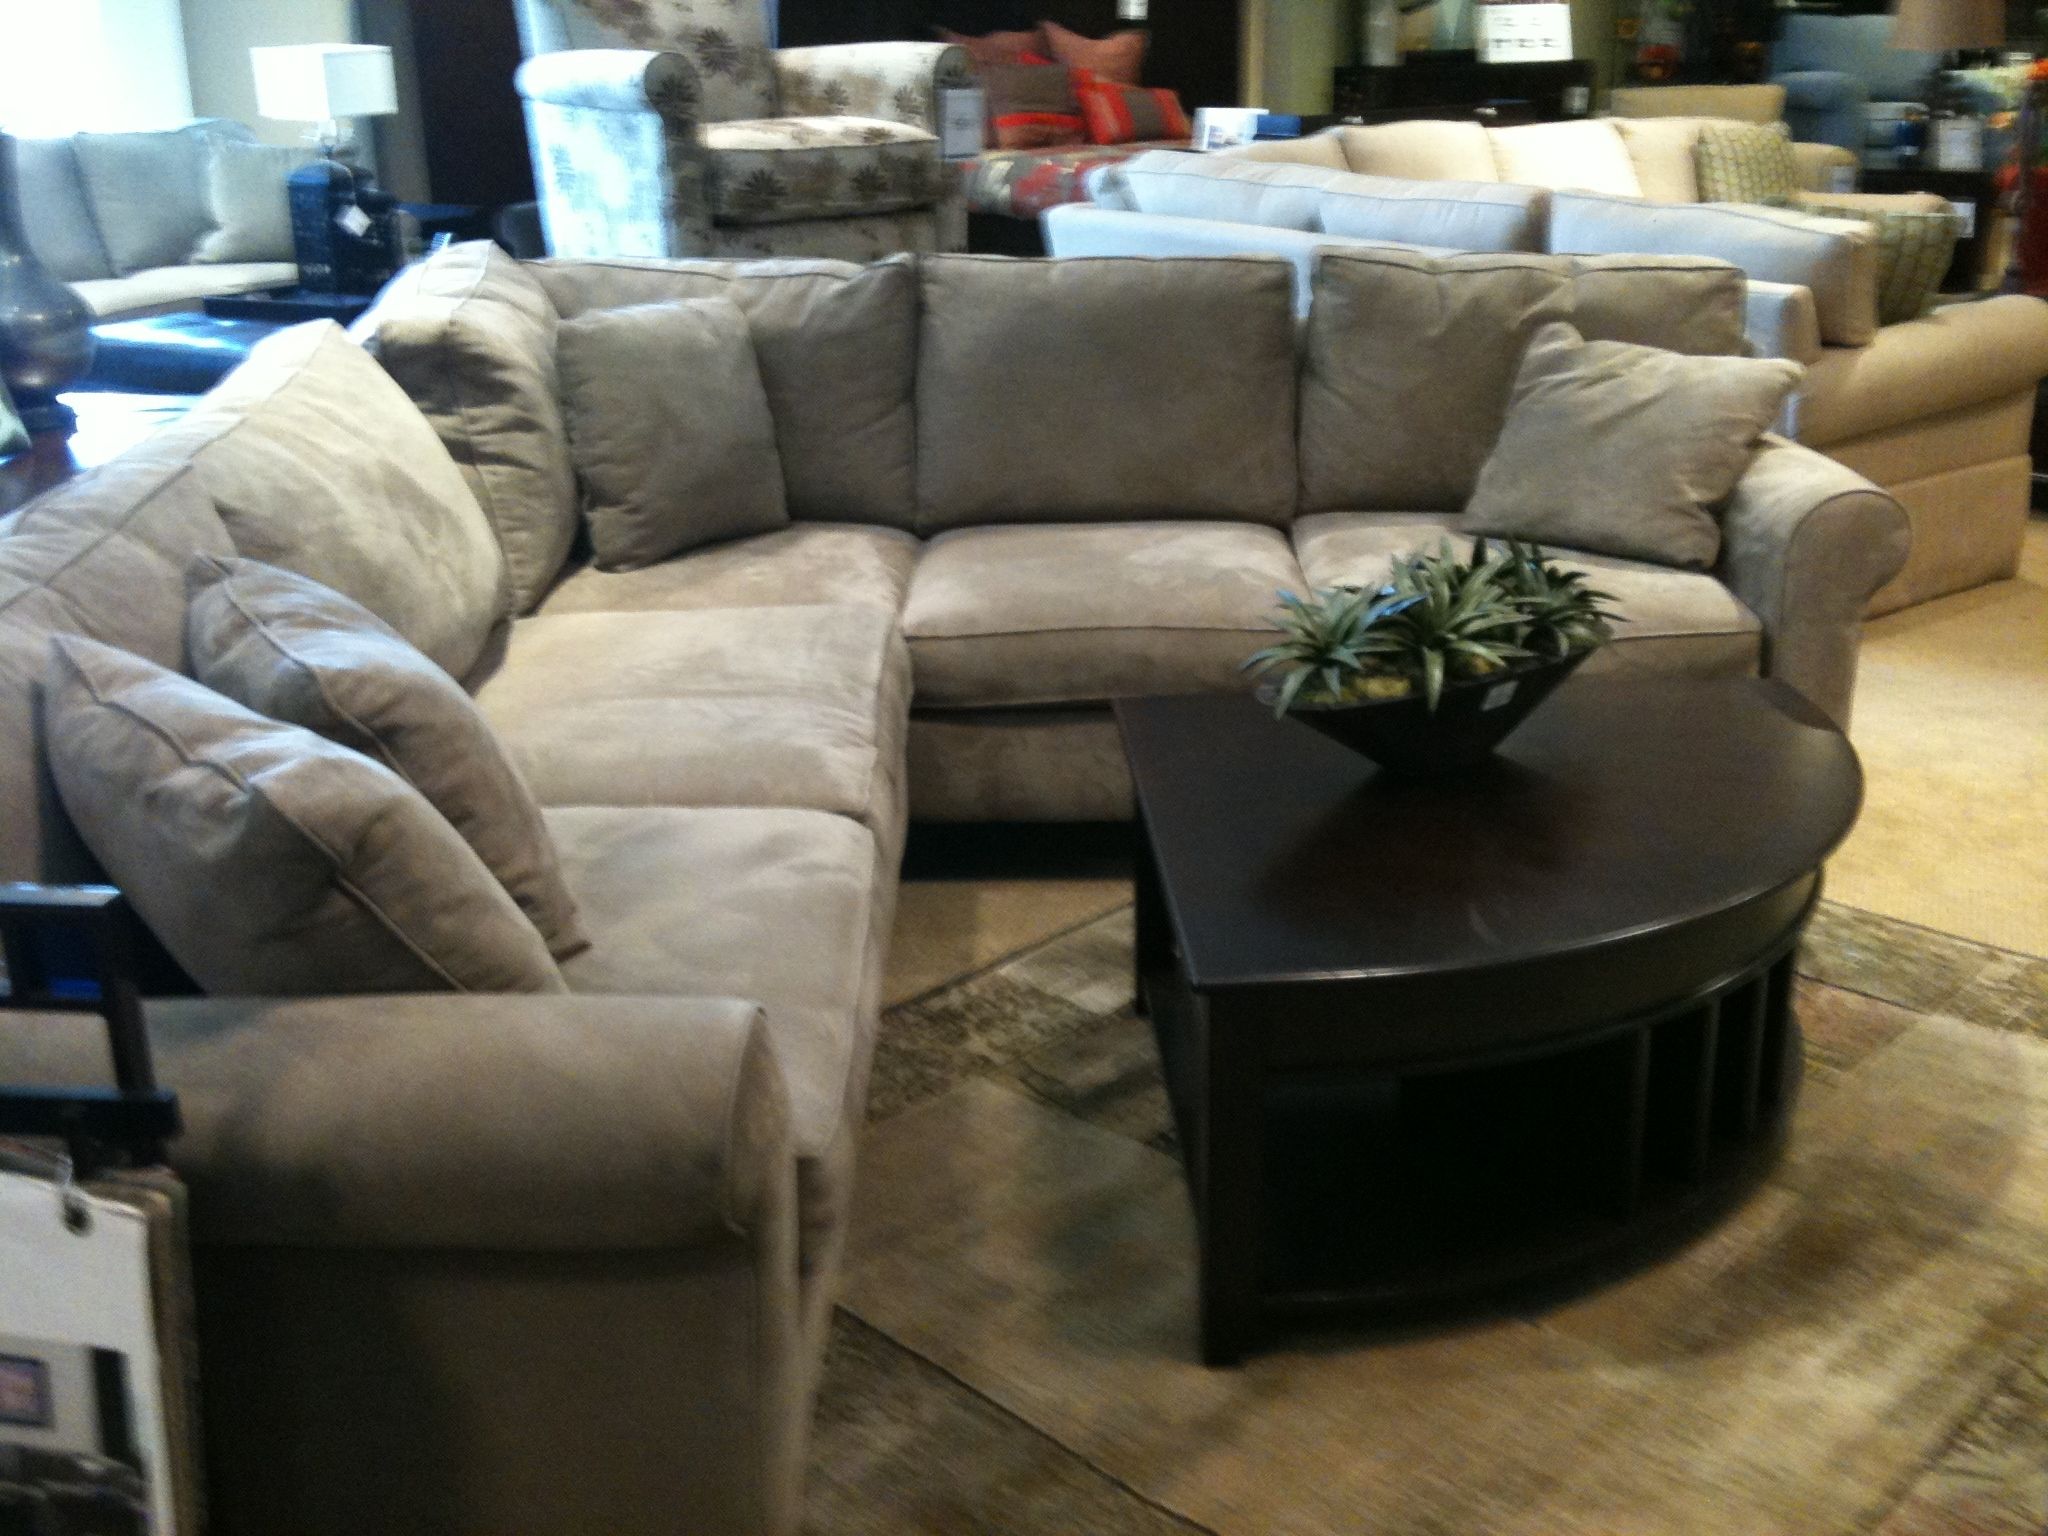 New Havertys Sectional Sofa 91 For Sofa Table Ideas With Havertys Throughout Sectional Sofas At Havertys (View 2 of 15)